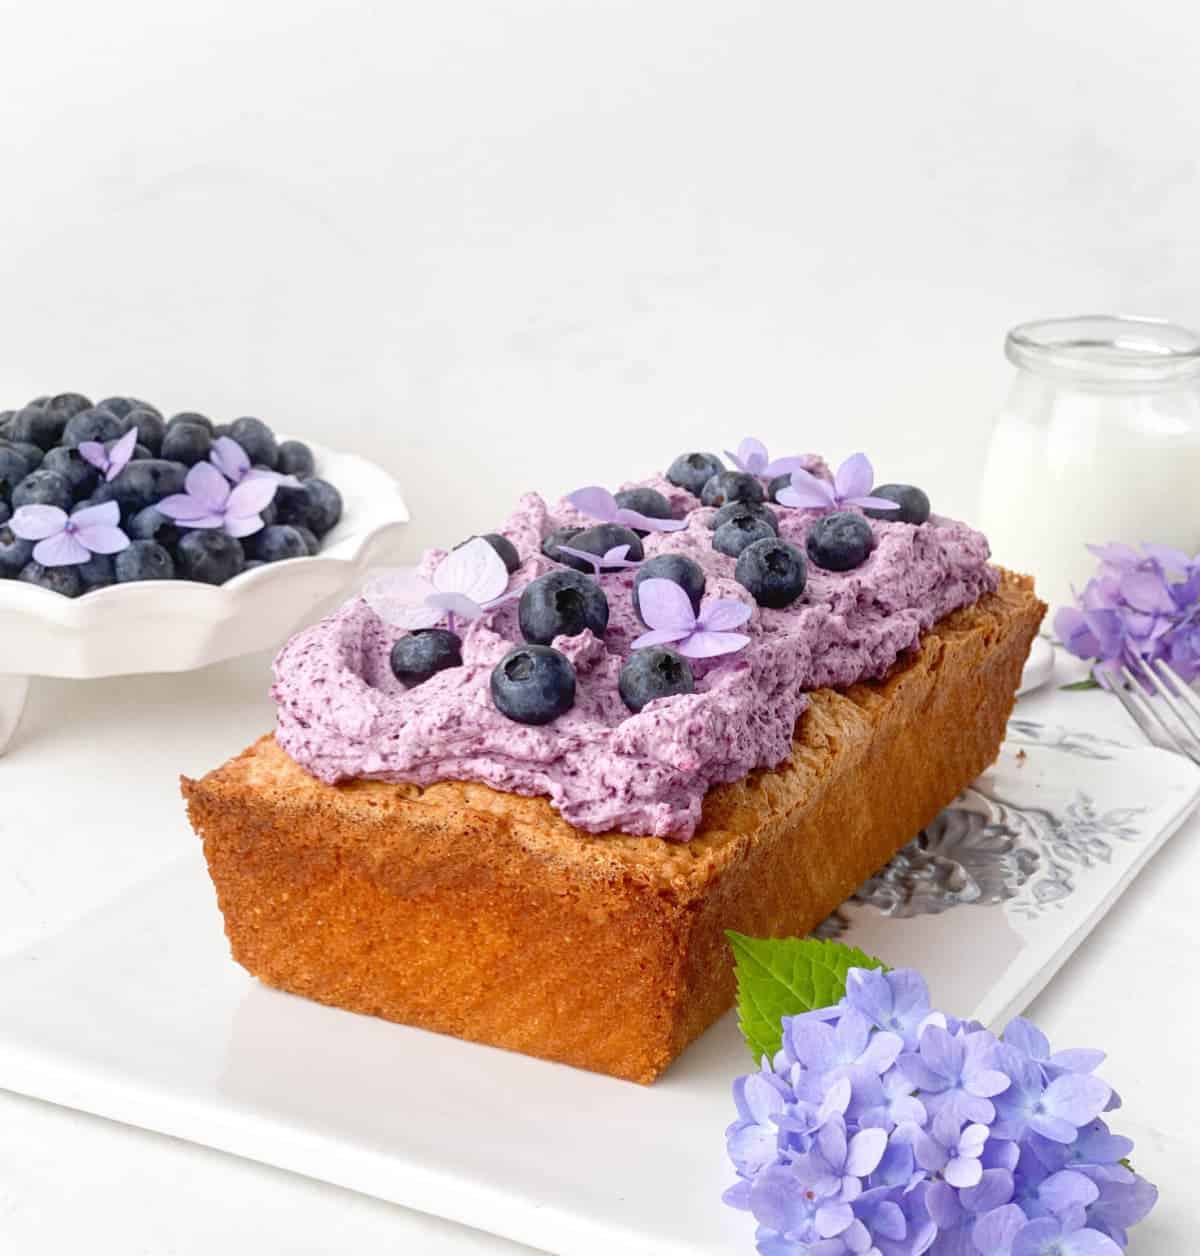 Blueberry Cornmeal Pound Cake on a white tray with blueberries and a glass of buttermilk.